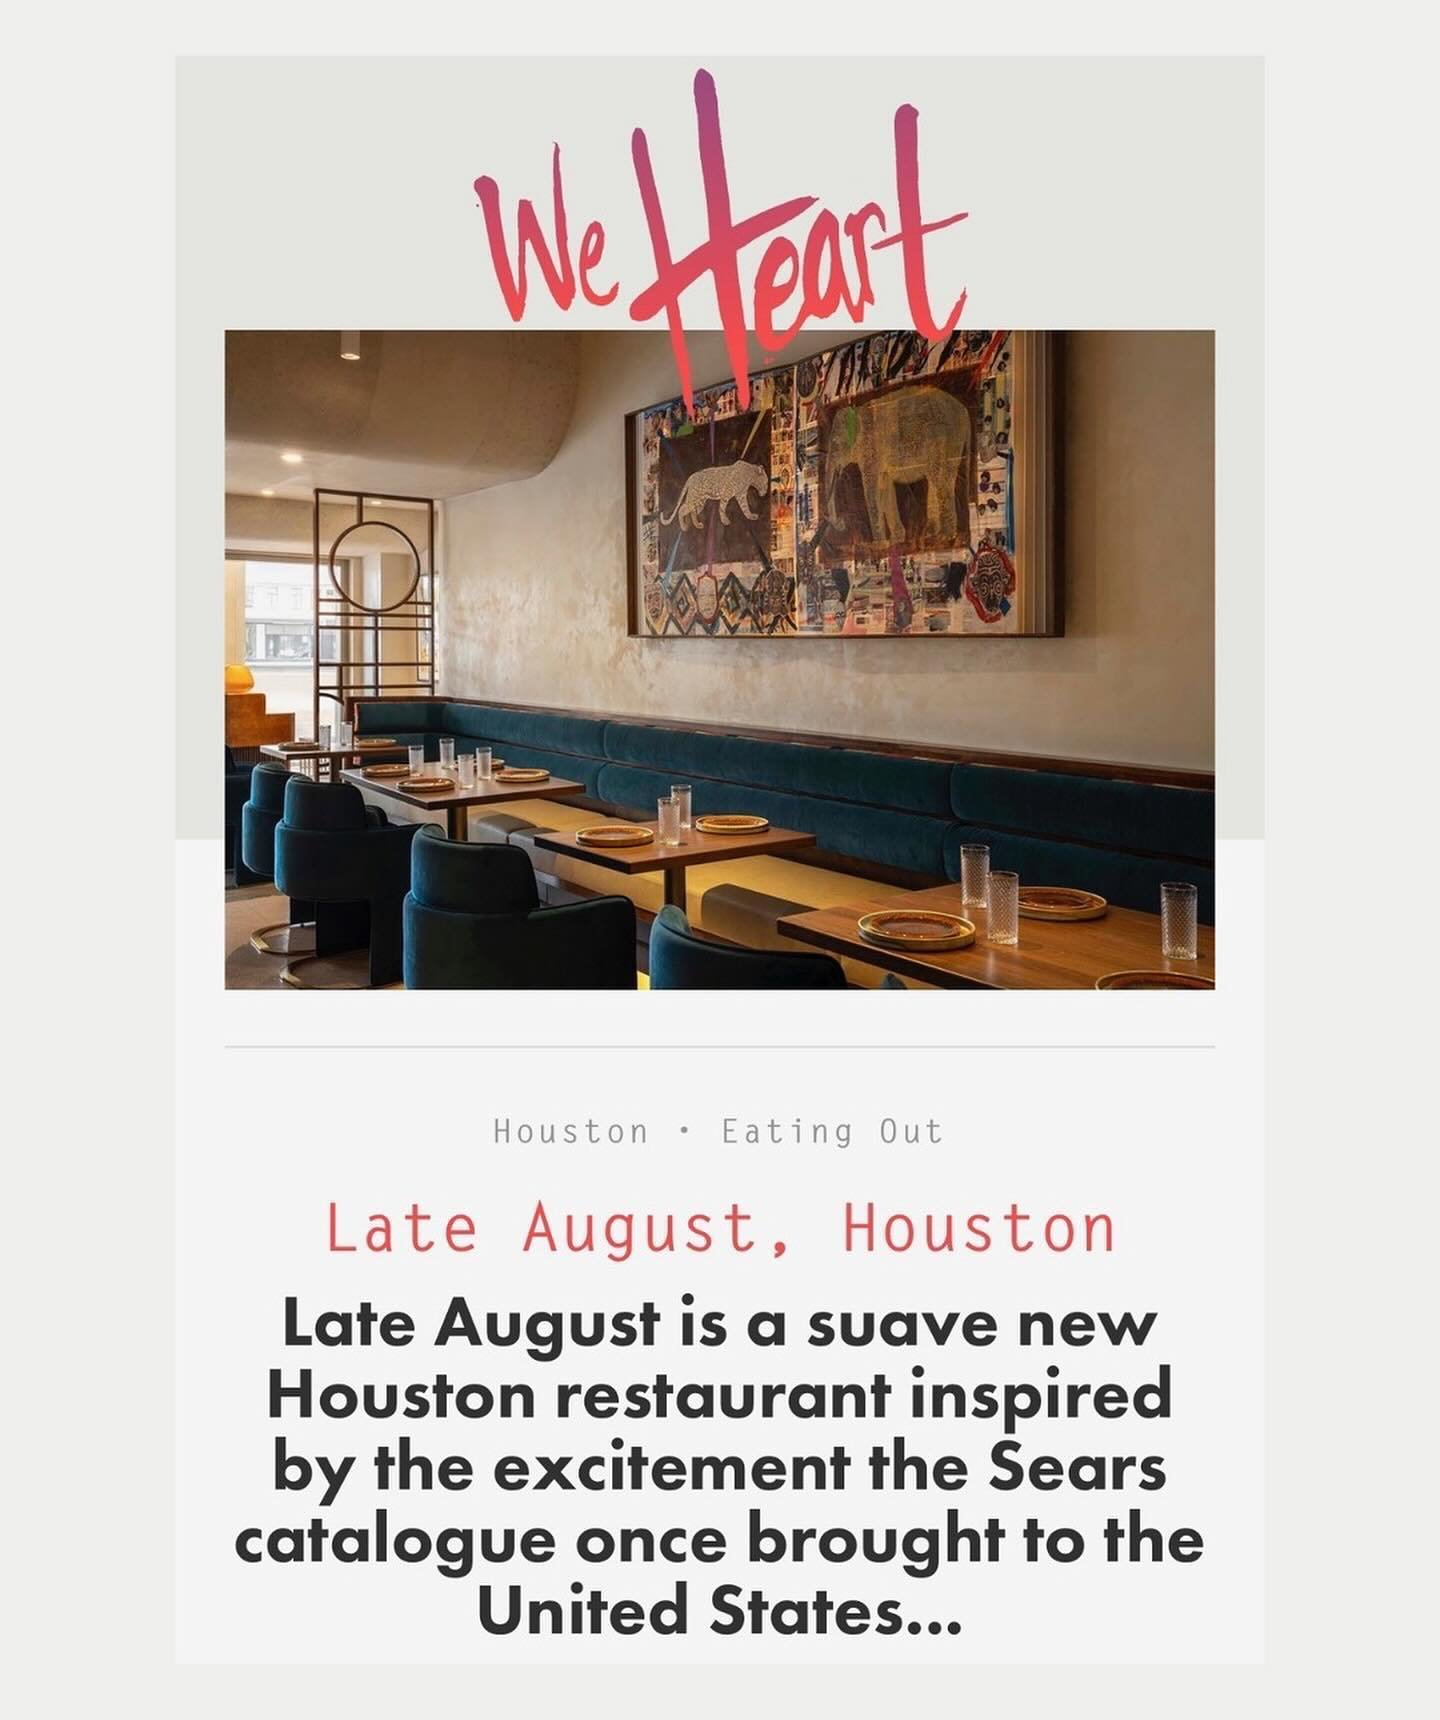 A CHIC restaurant inside of a former Sears (with the original terrazzo flooring??)&mdash;only @gindesigngroup. Thank you @we_heart for spreading the word about Gin Design Group&rsquo;s latest opening. Head to our stories for more press. @lateaugustht